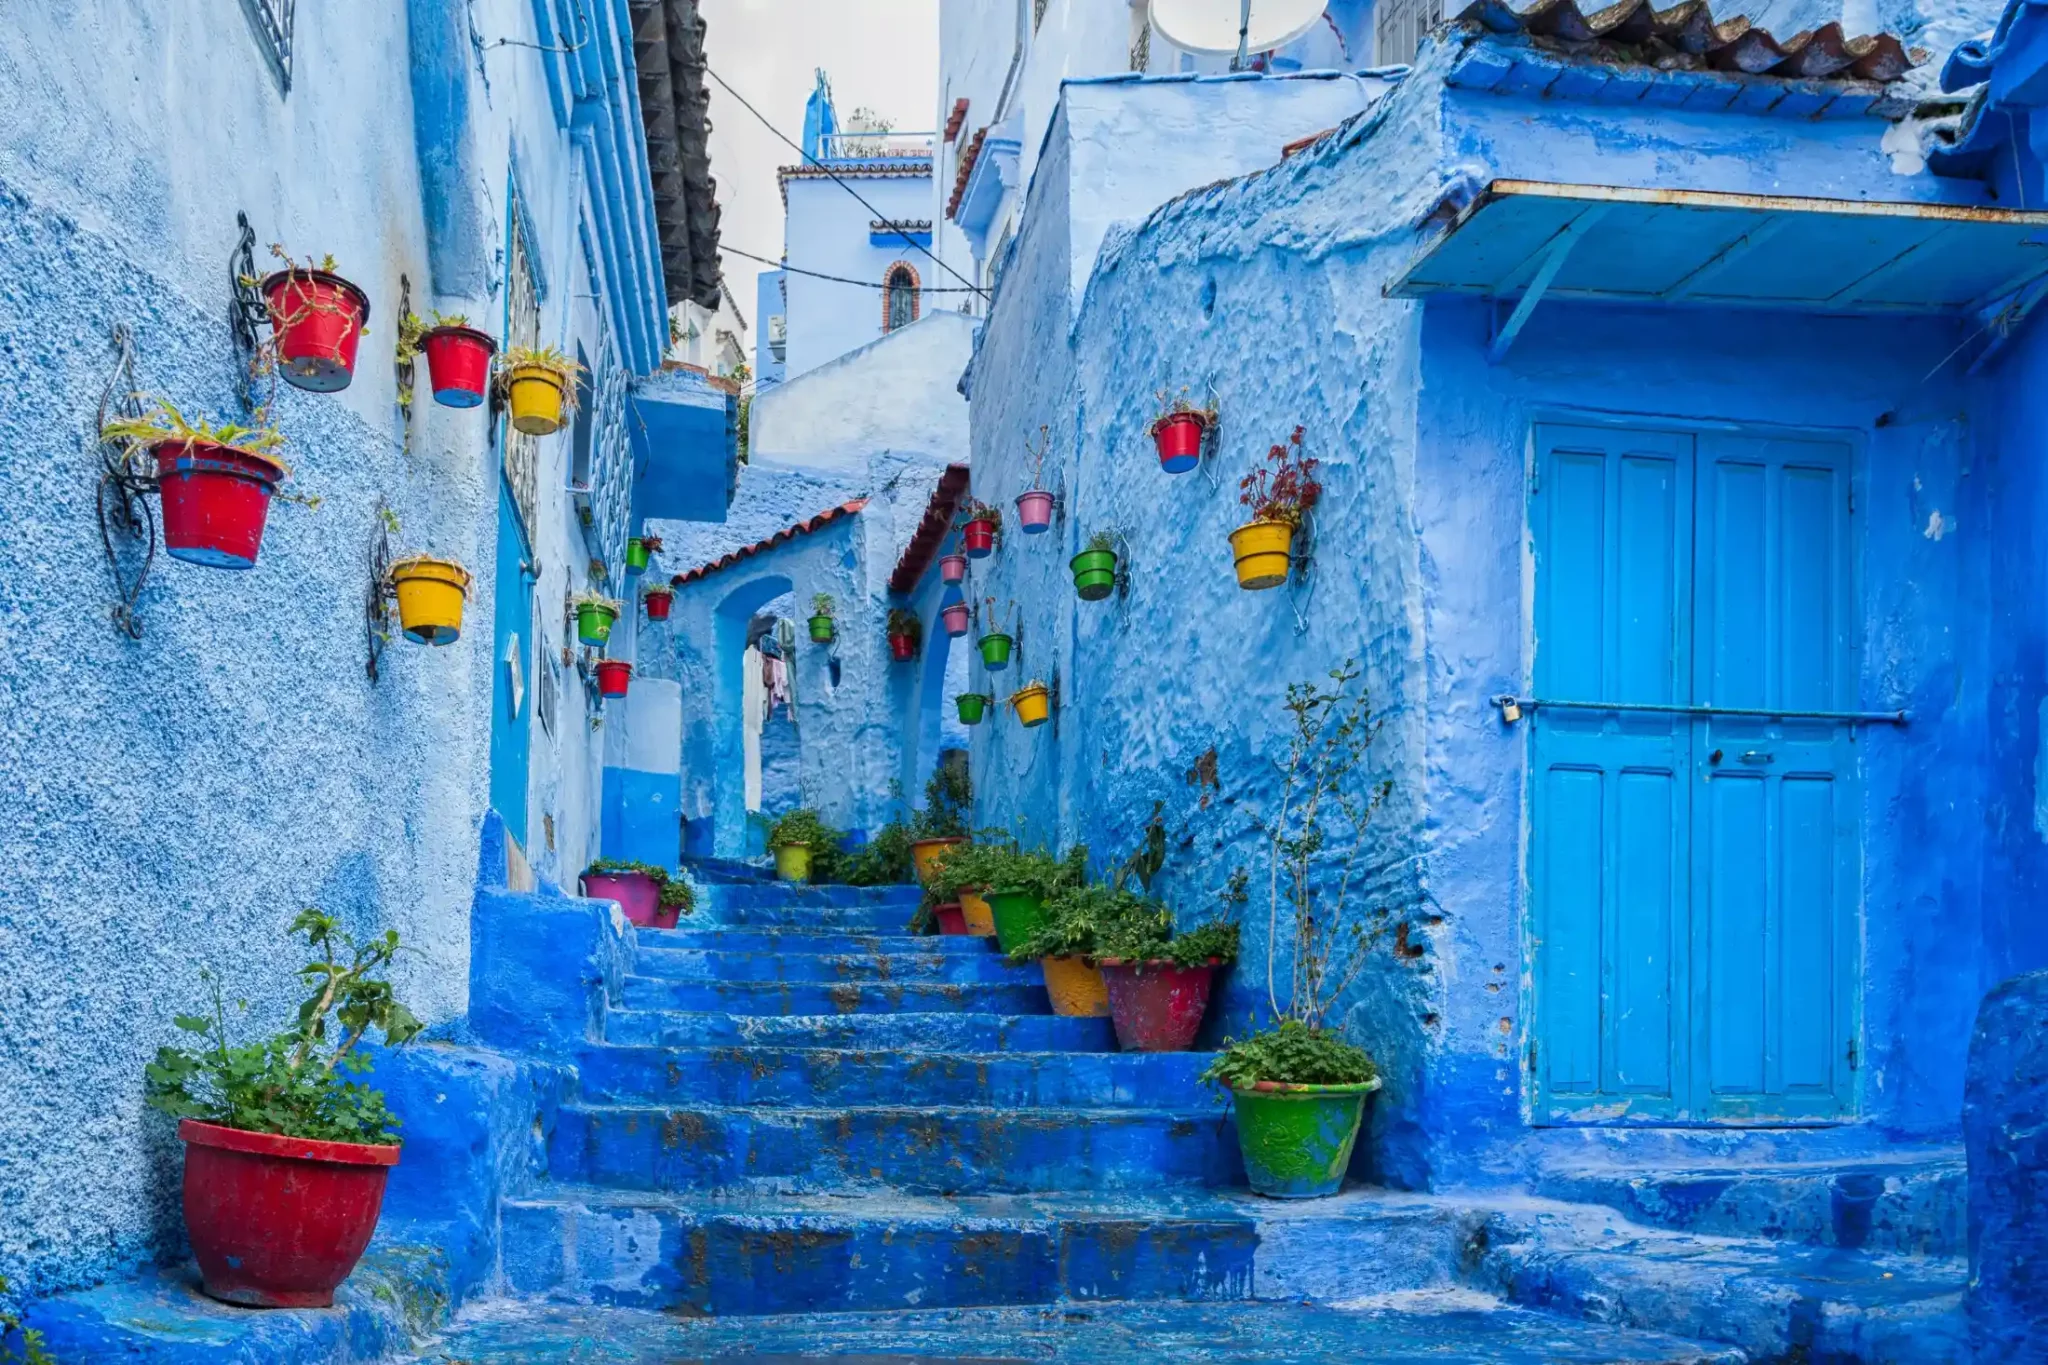 The Blue City of Chefchaouen, Morocco